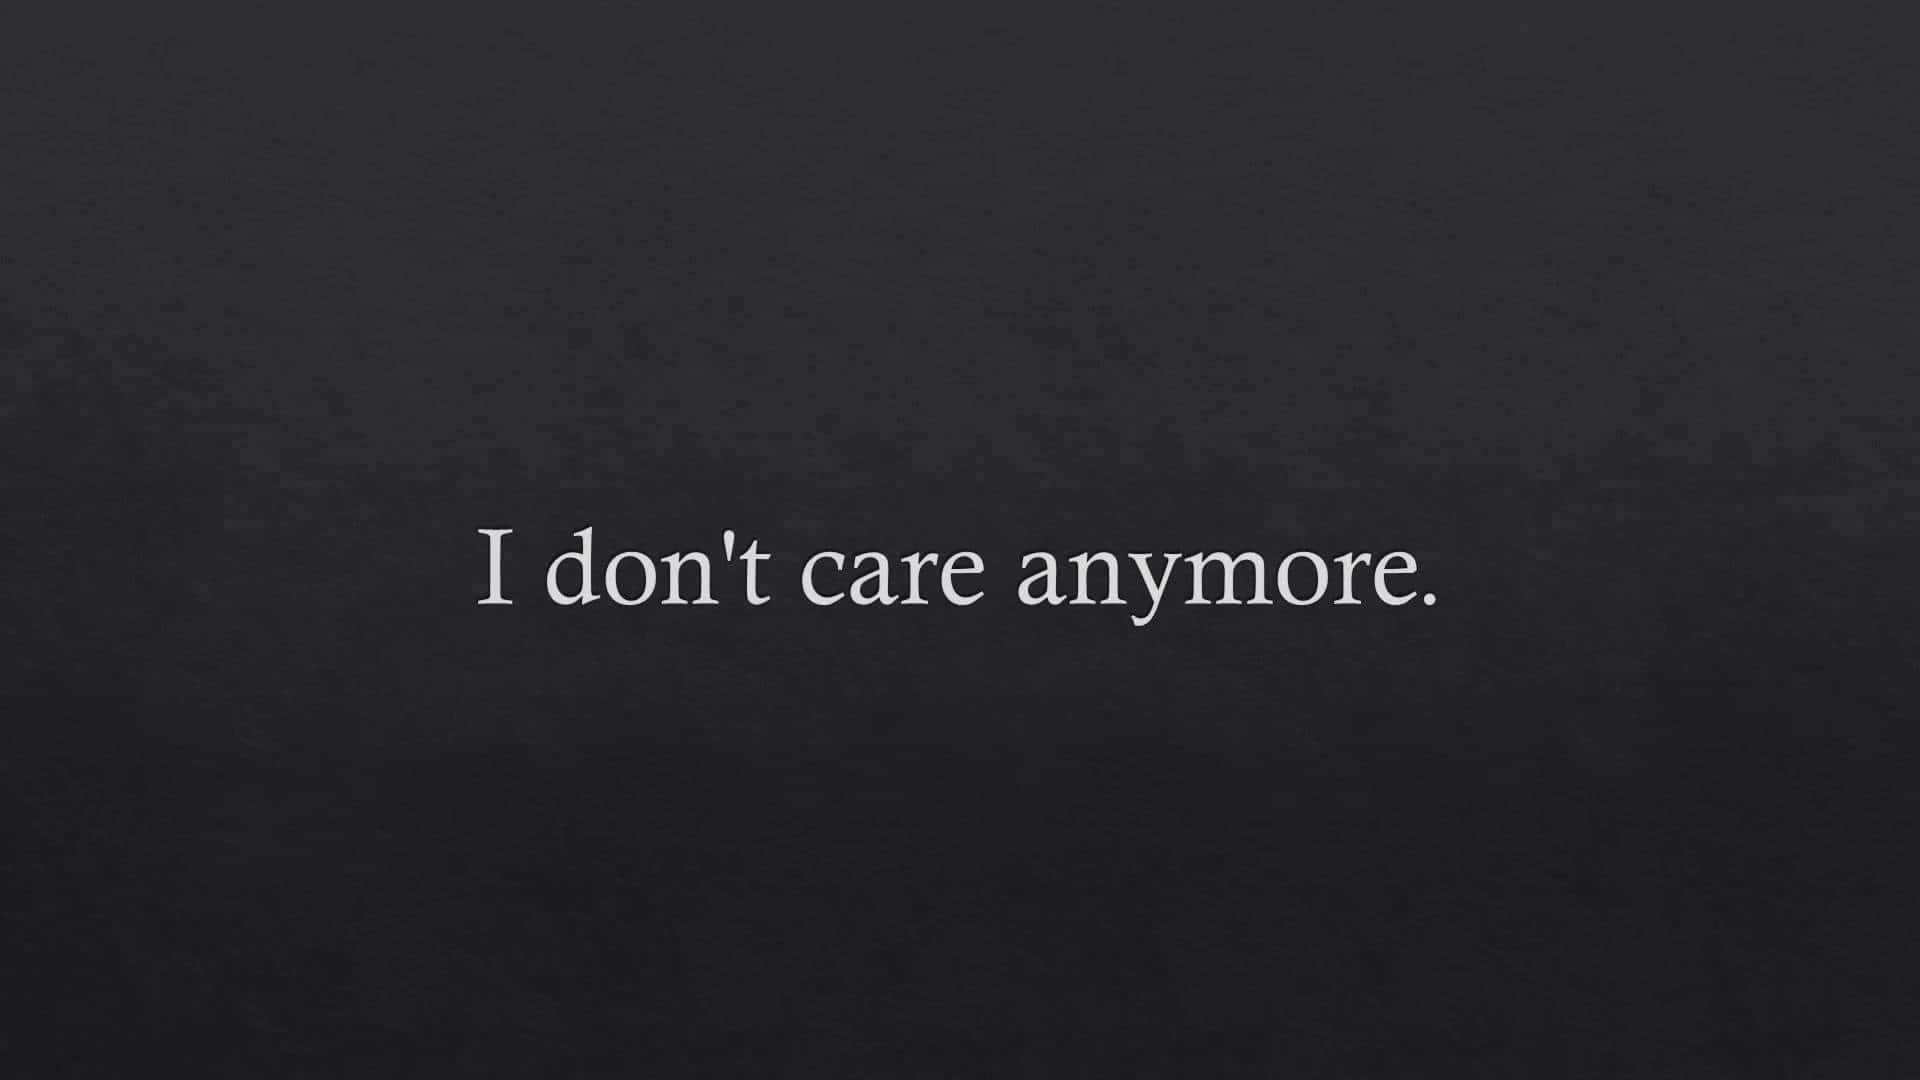 I Don't Care Anymore Quotes Wallpaper